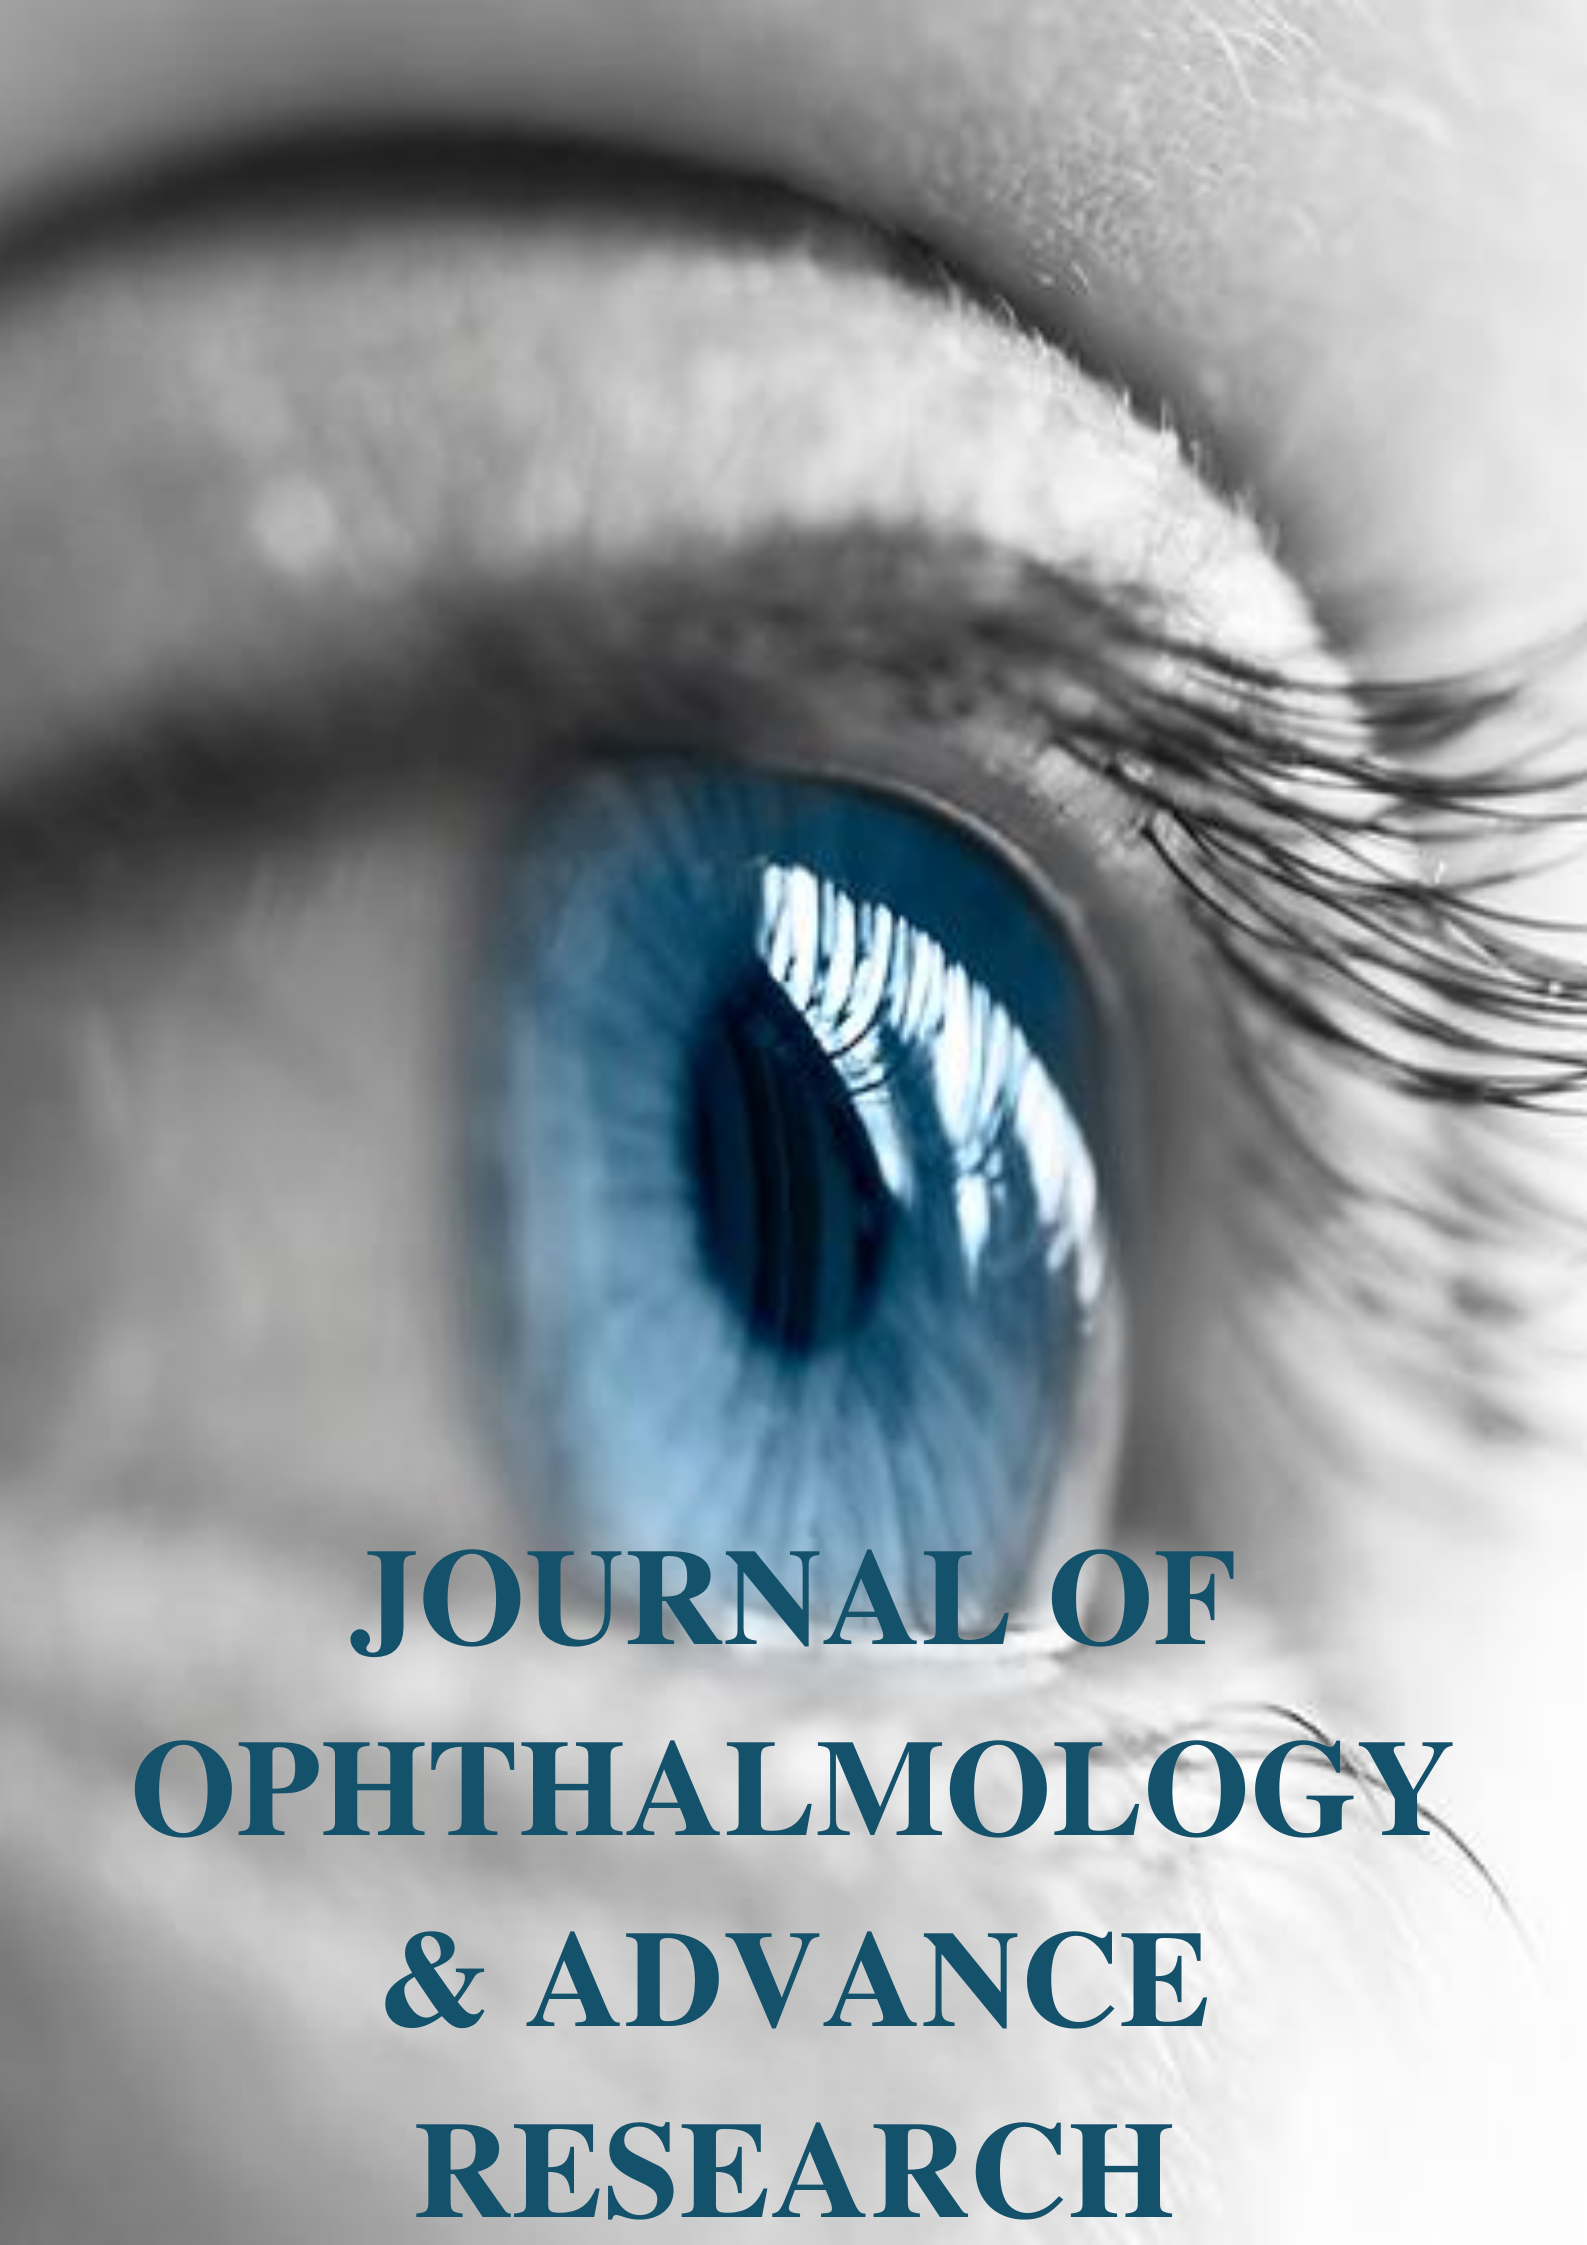 research topics about ophthalmology